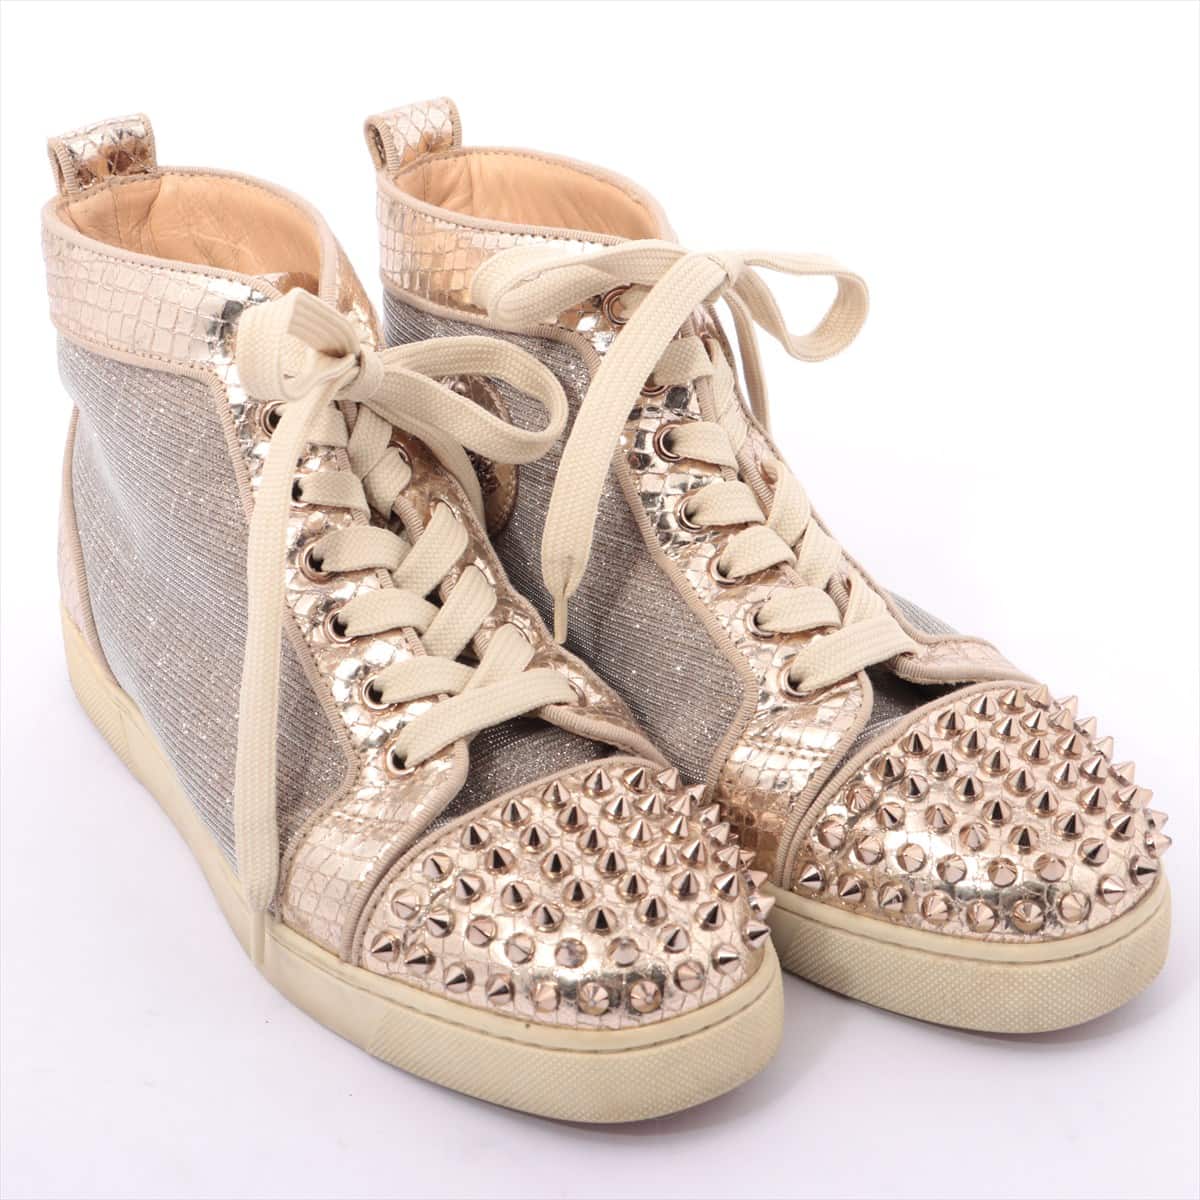 Christian Louboutin Lewis Spike Leather x fabric High-top Sneakers 38.5 Ladies' Gold × Silver